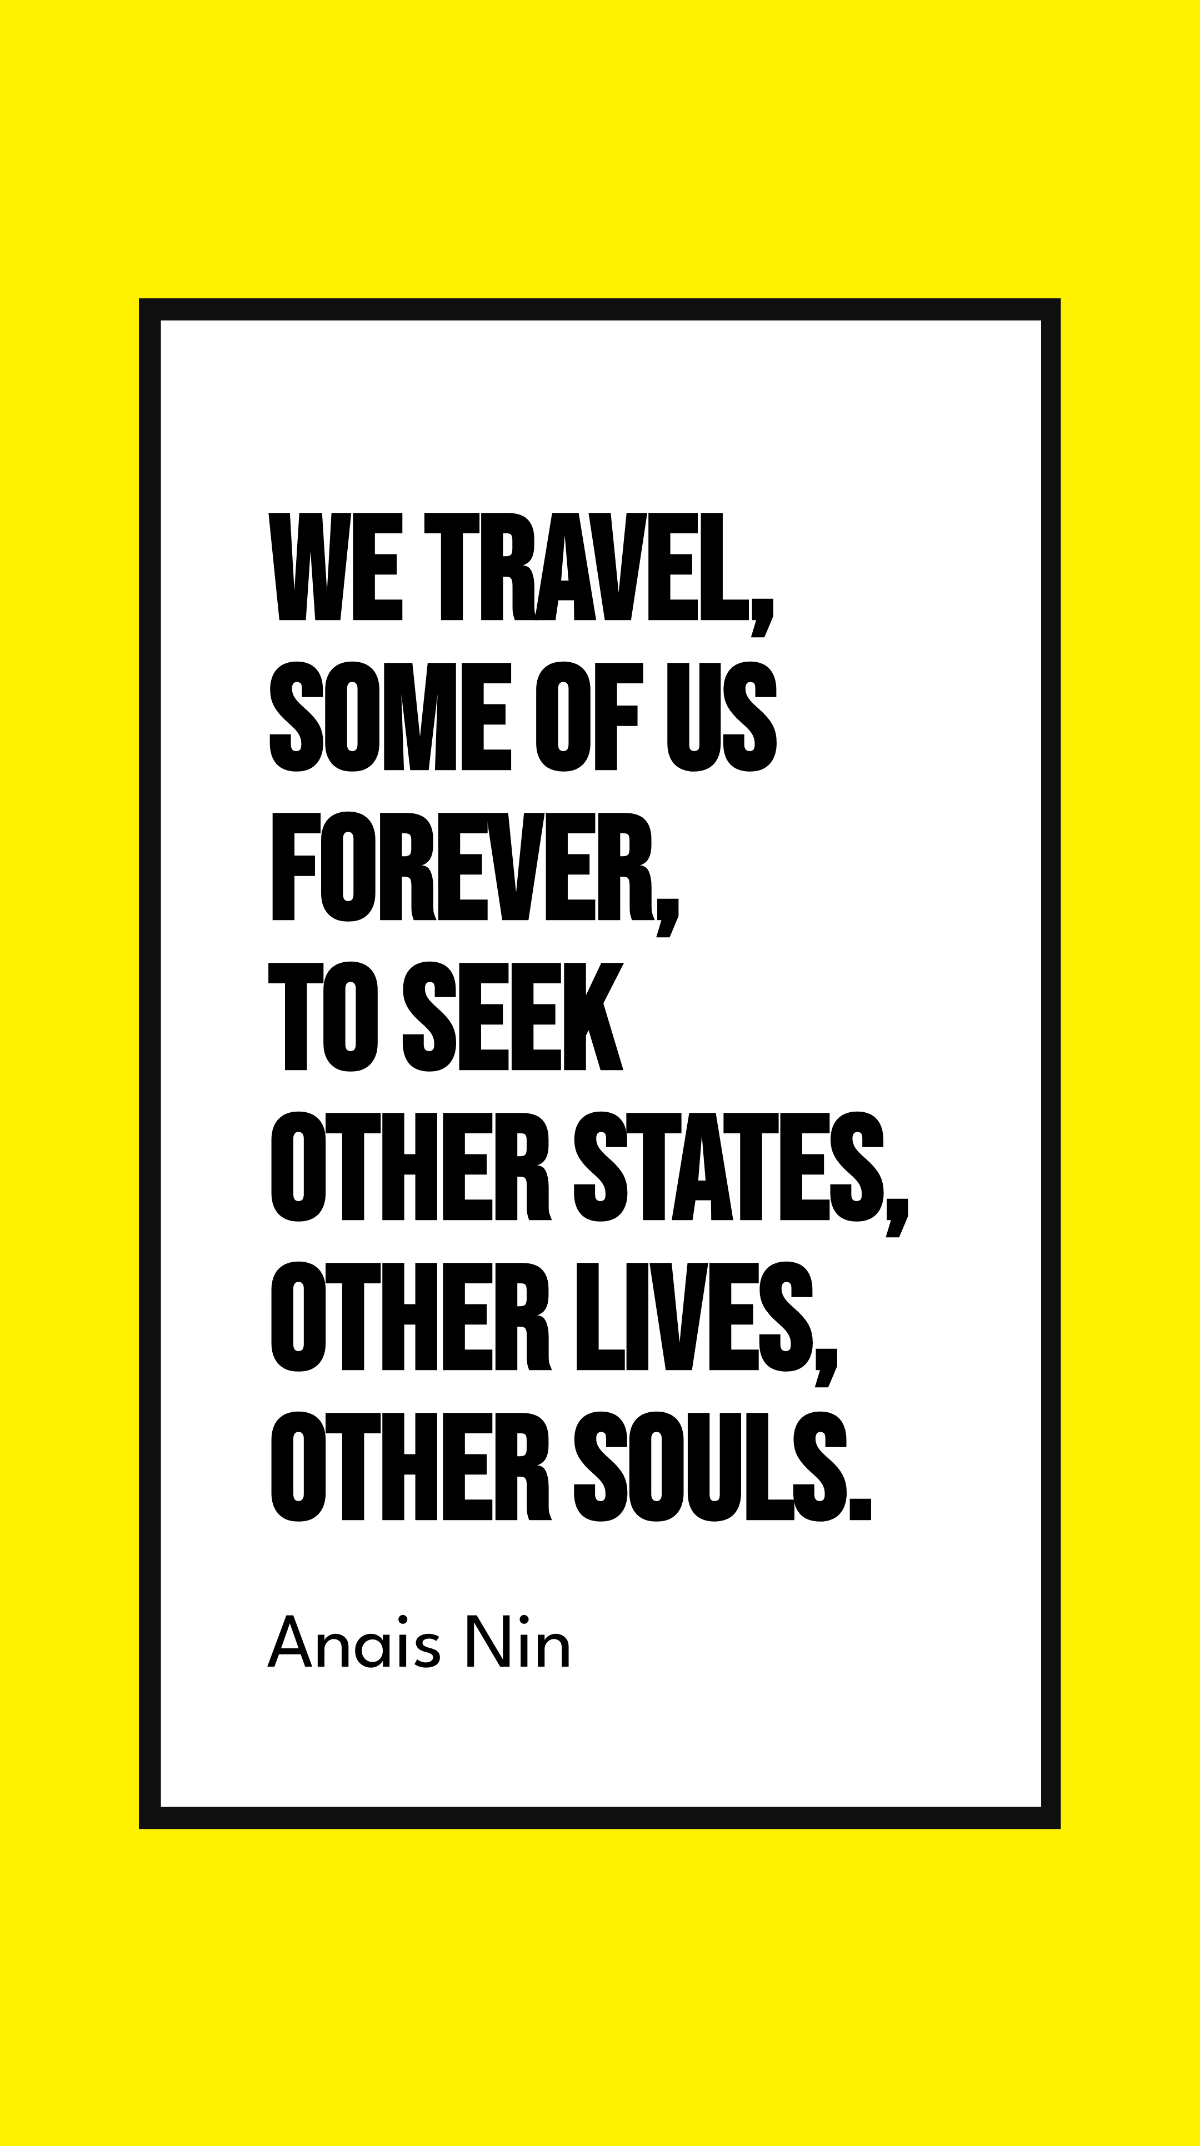 Anais Nin - We travel, some of us forever, to seek other states, other lives, other souls.